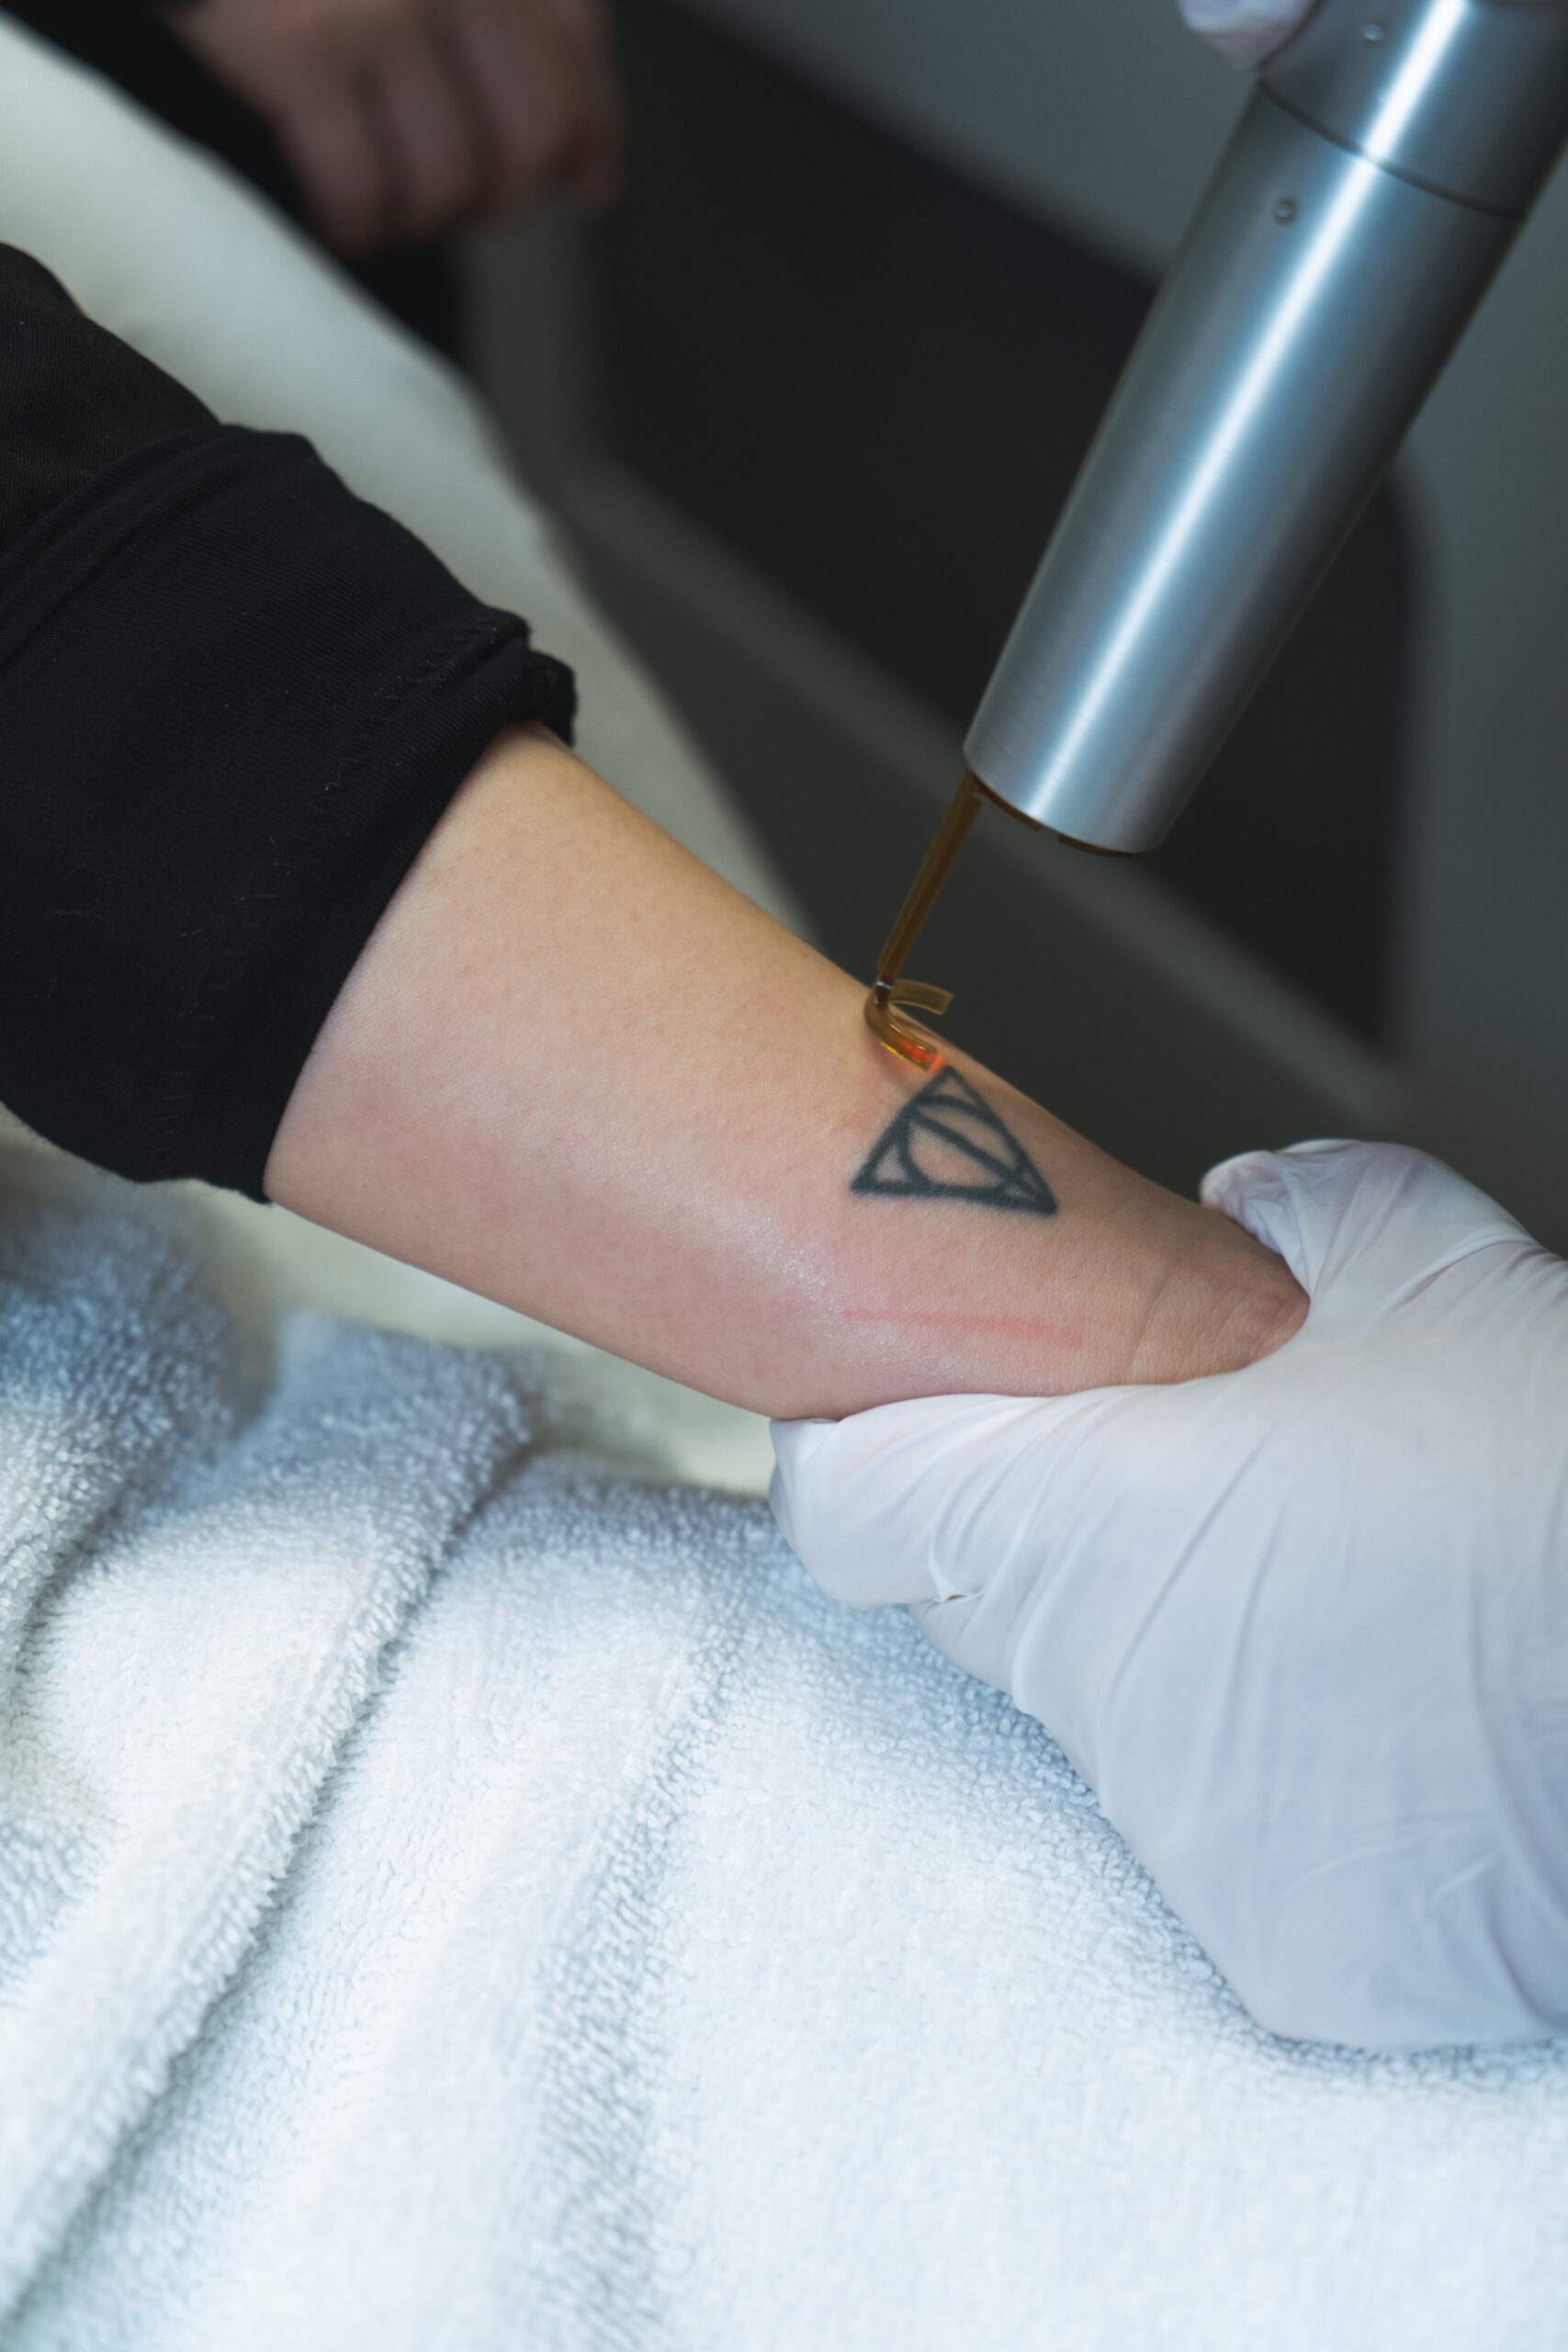 We Are The #1 Laser Tattoo Removal Clinic in Vancouver